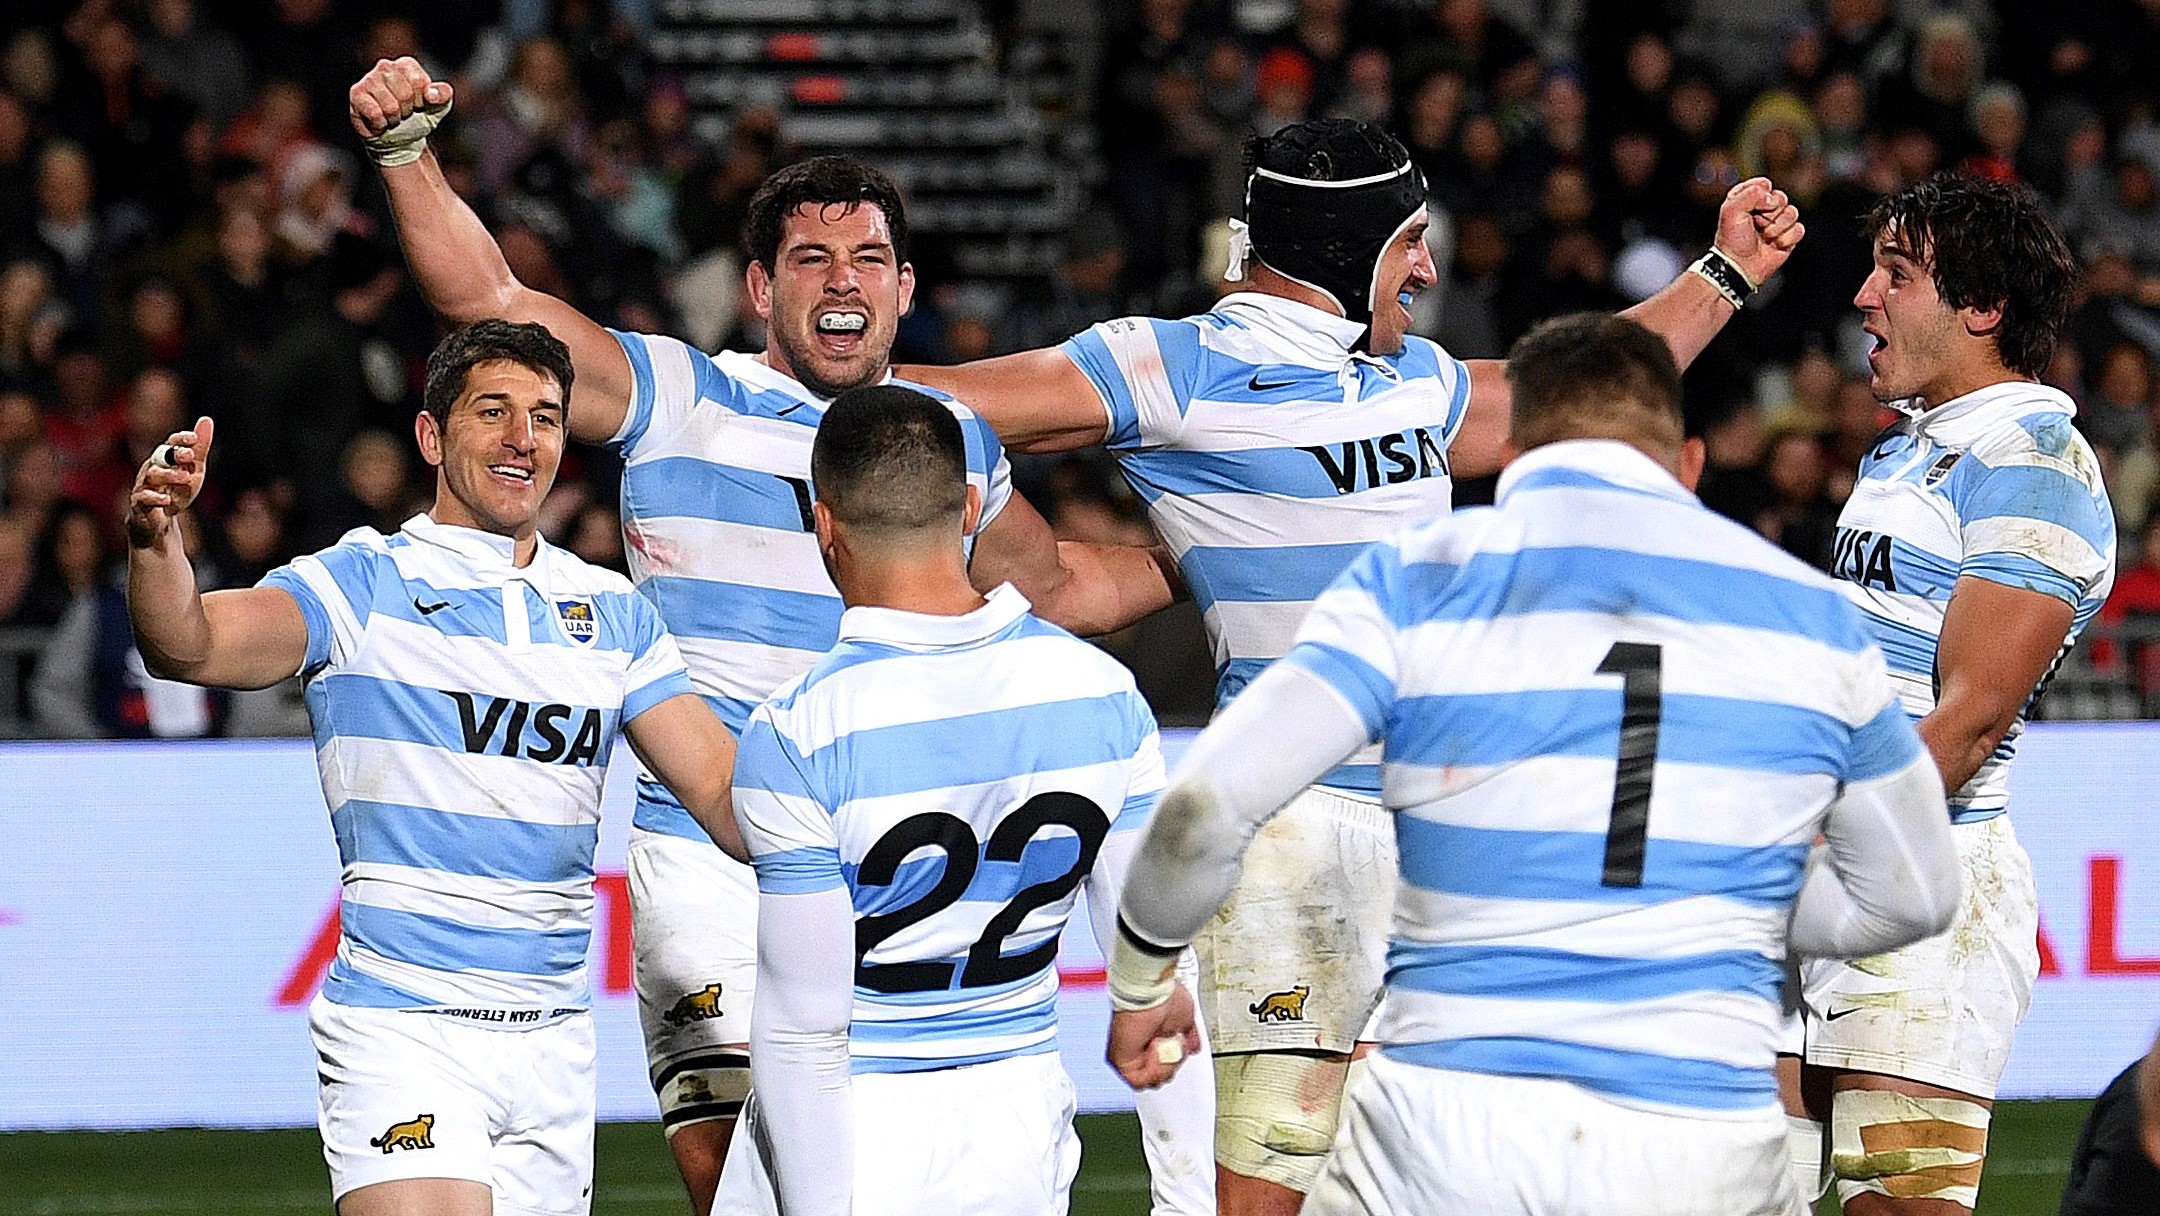 CHRISTCHURCH, NEW ZEALAND - AUGUST 27: Argentina celebrate after defeating New Zealand during The Rugby Championship match between the New Zealand All Blacks and Argentina Pumas at Orangetheory Stadium on August 27, 2022 in Christchurch, New Zealand. (Photo by Joe Allison/Getty Images)